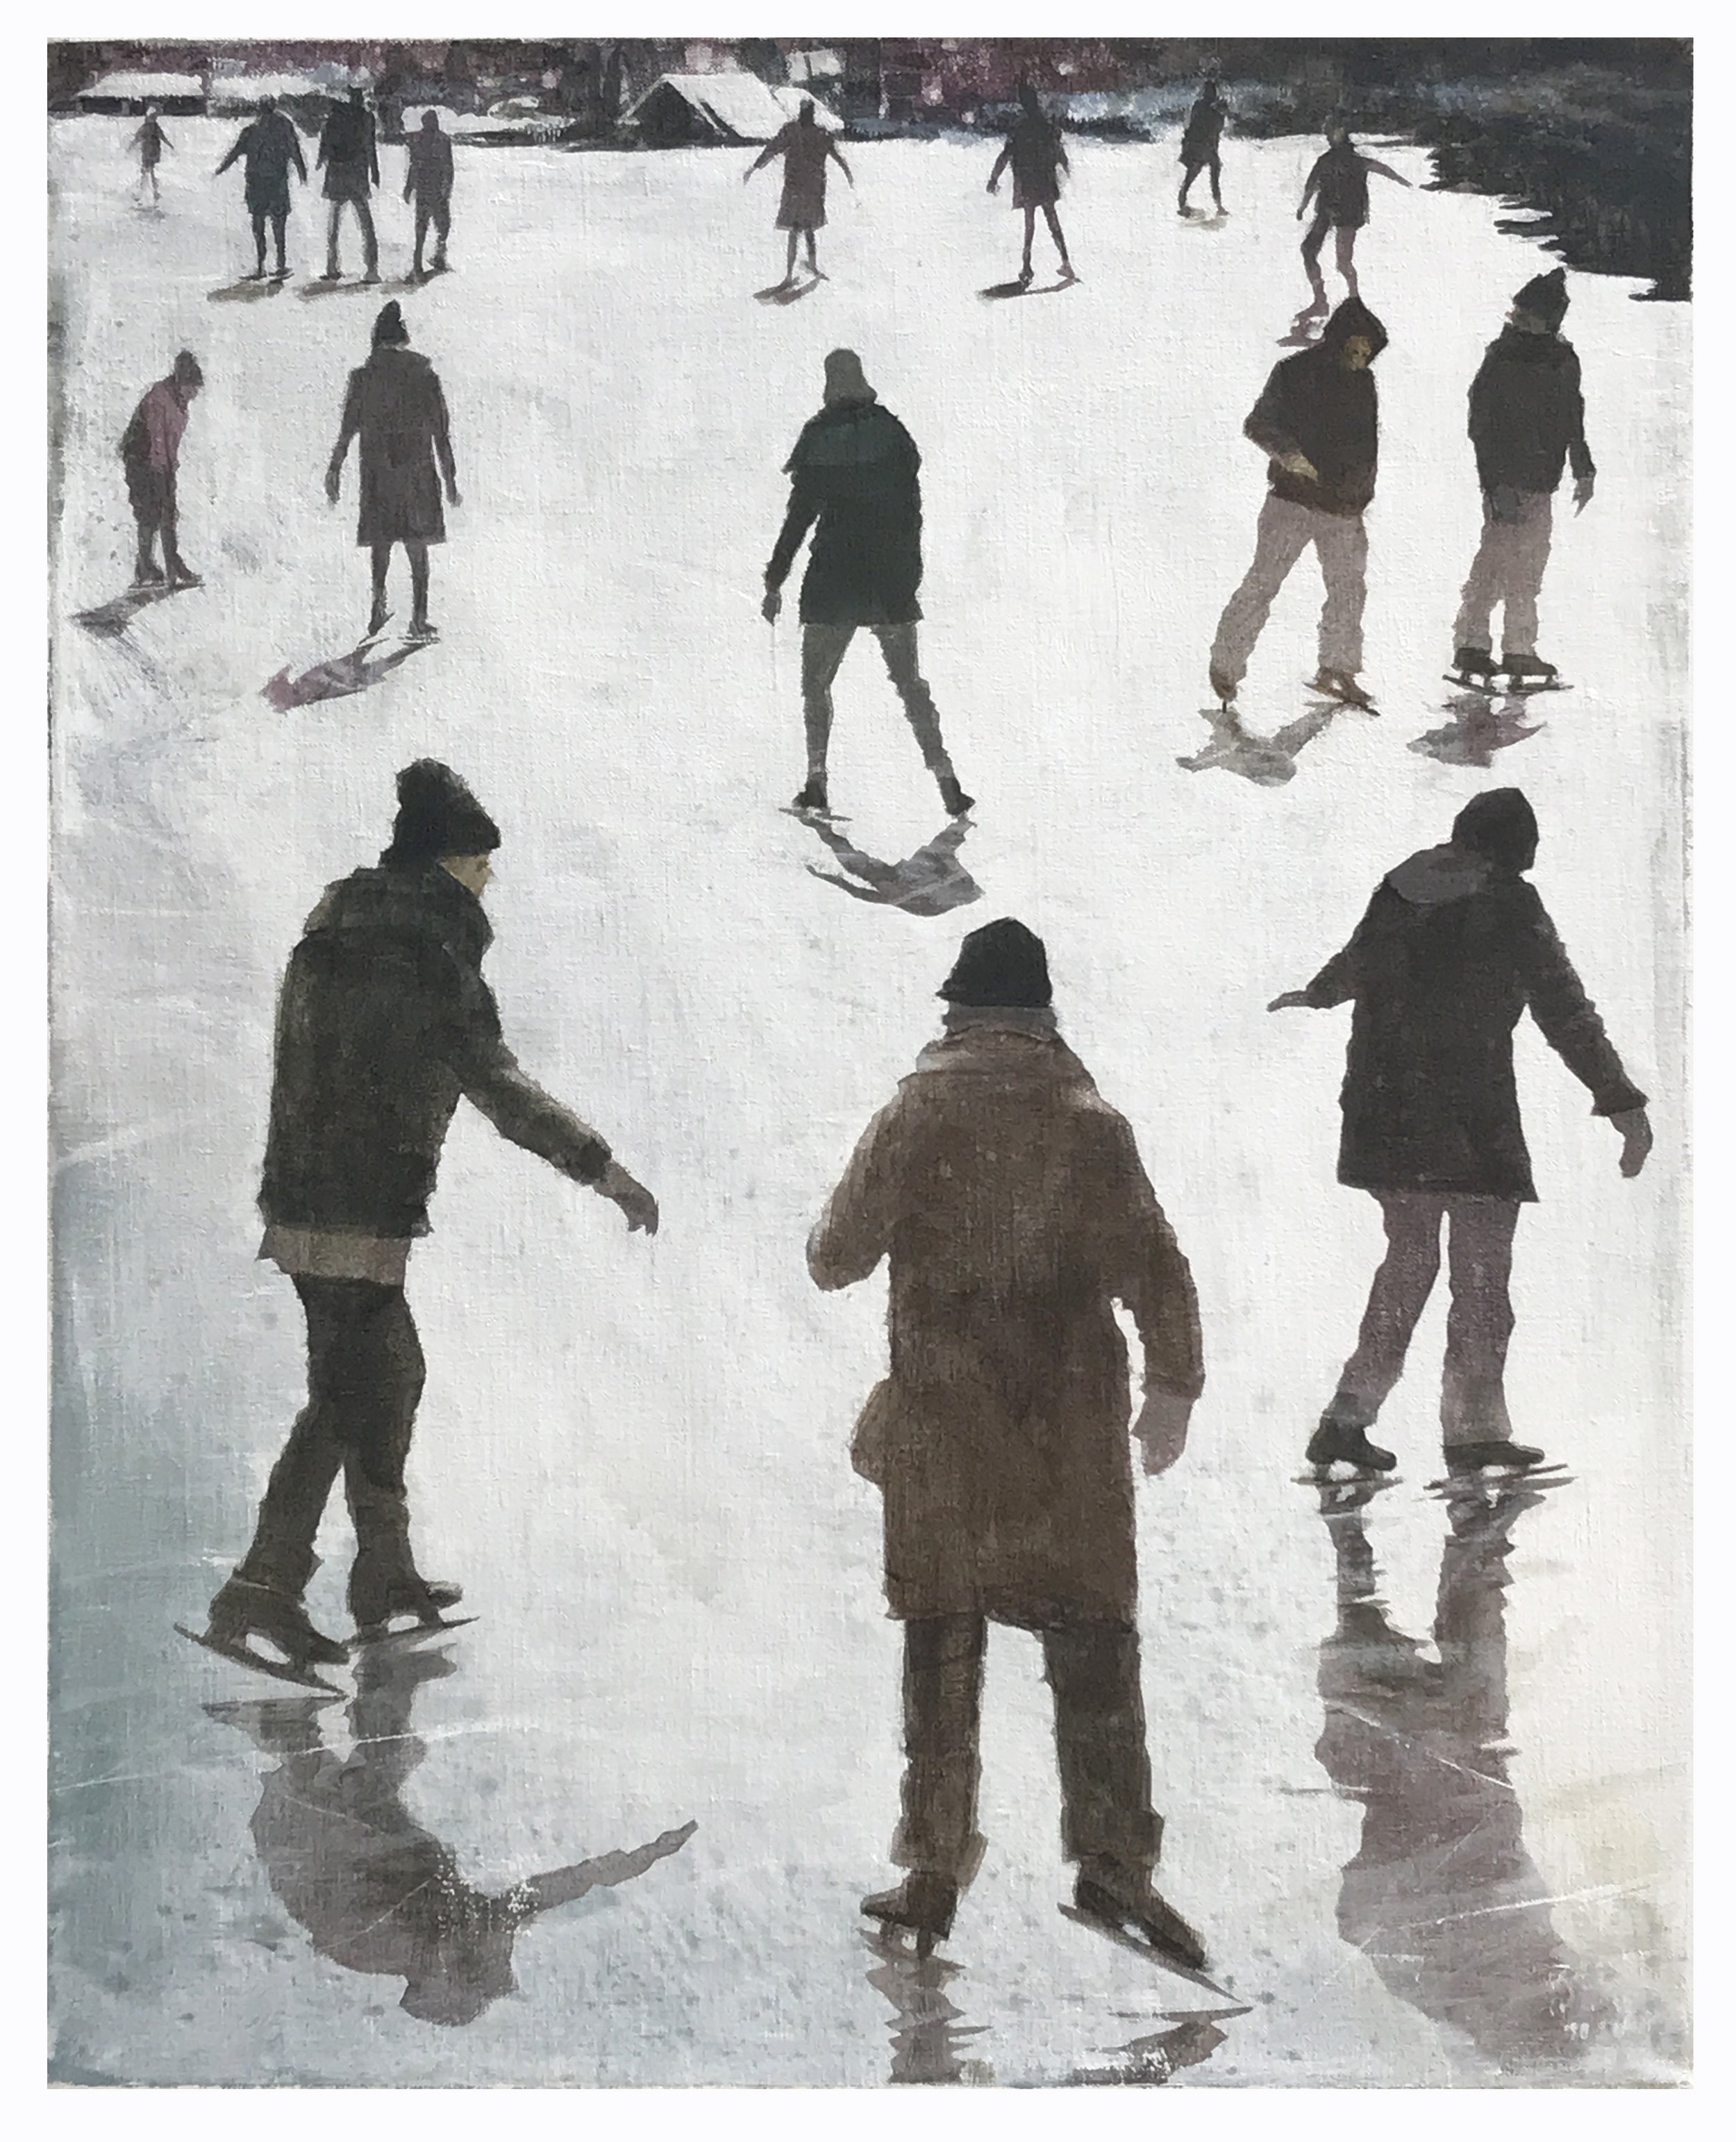  Skaters 1 24 x 19 inches (60 x 48 cm) Acrylic on linen 2021 